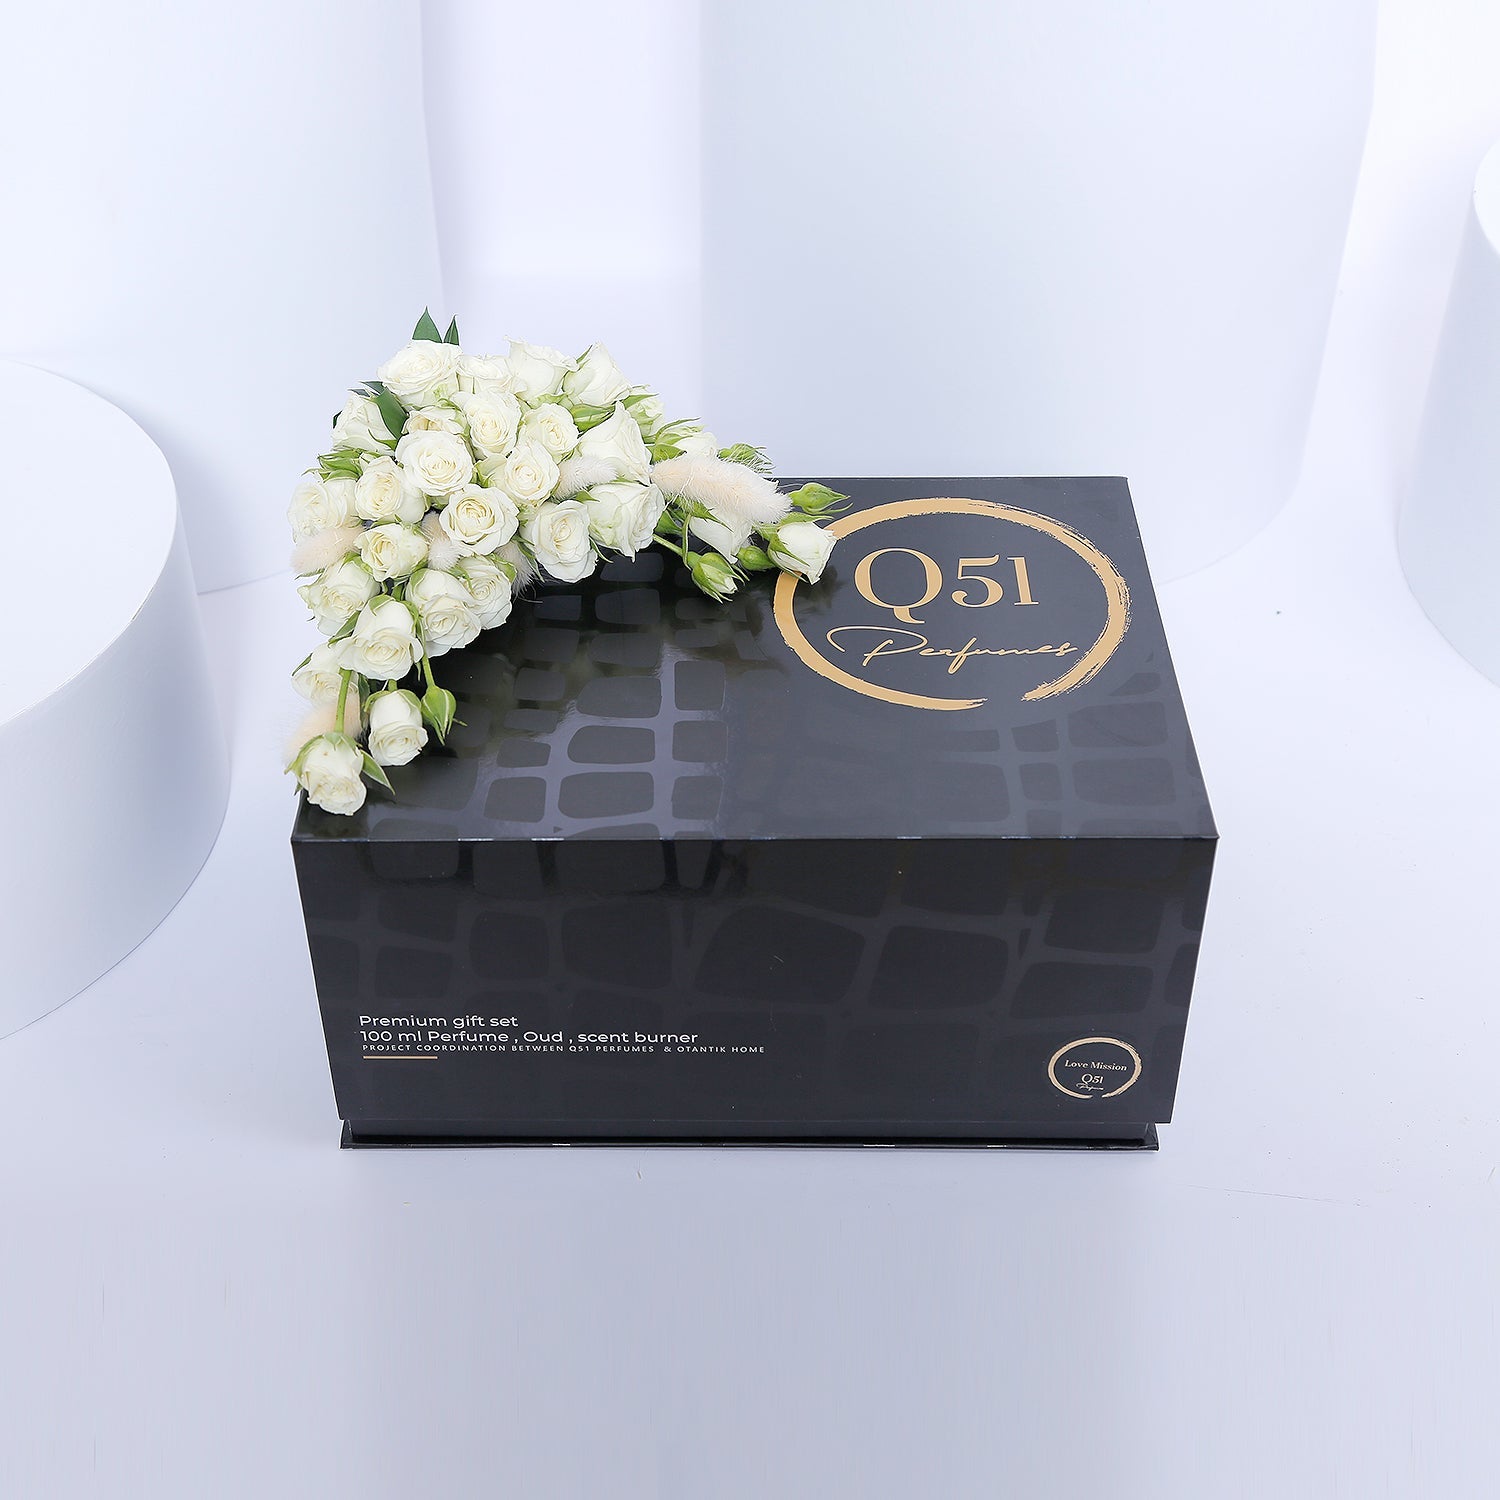 Teal Incense Burner from Q51 Perfumes